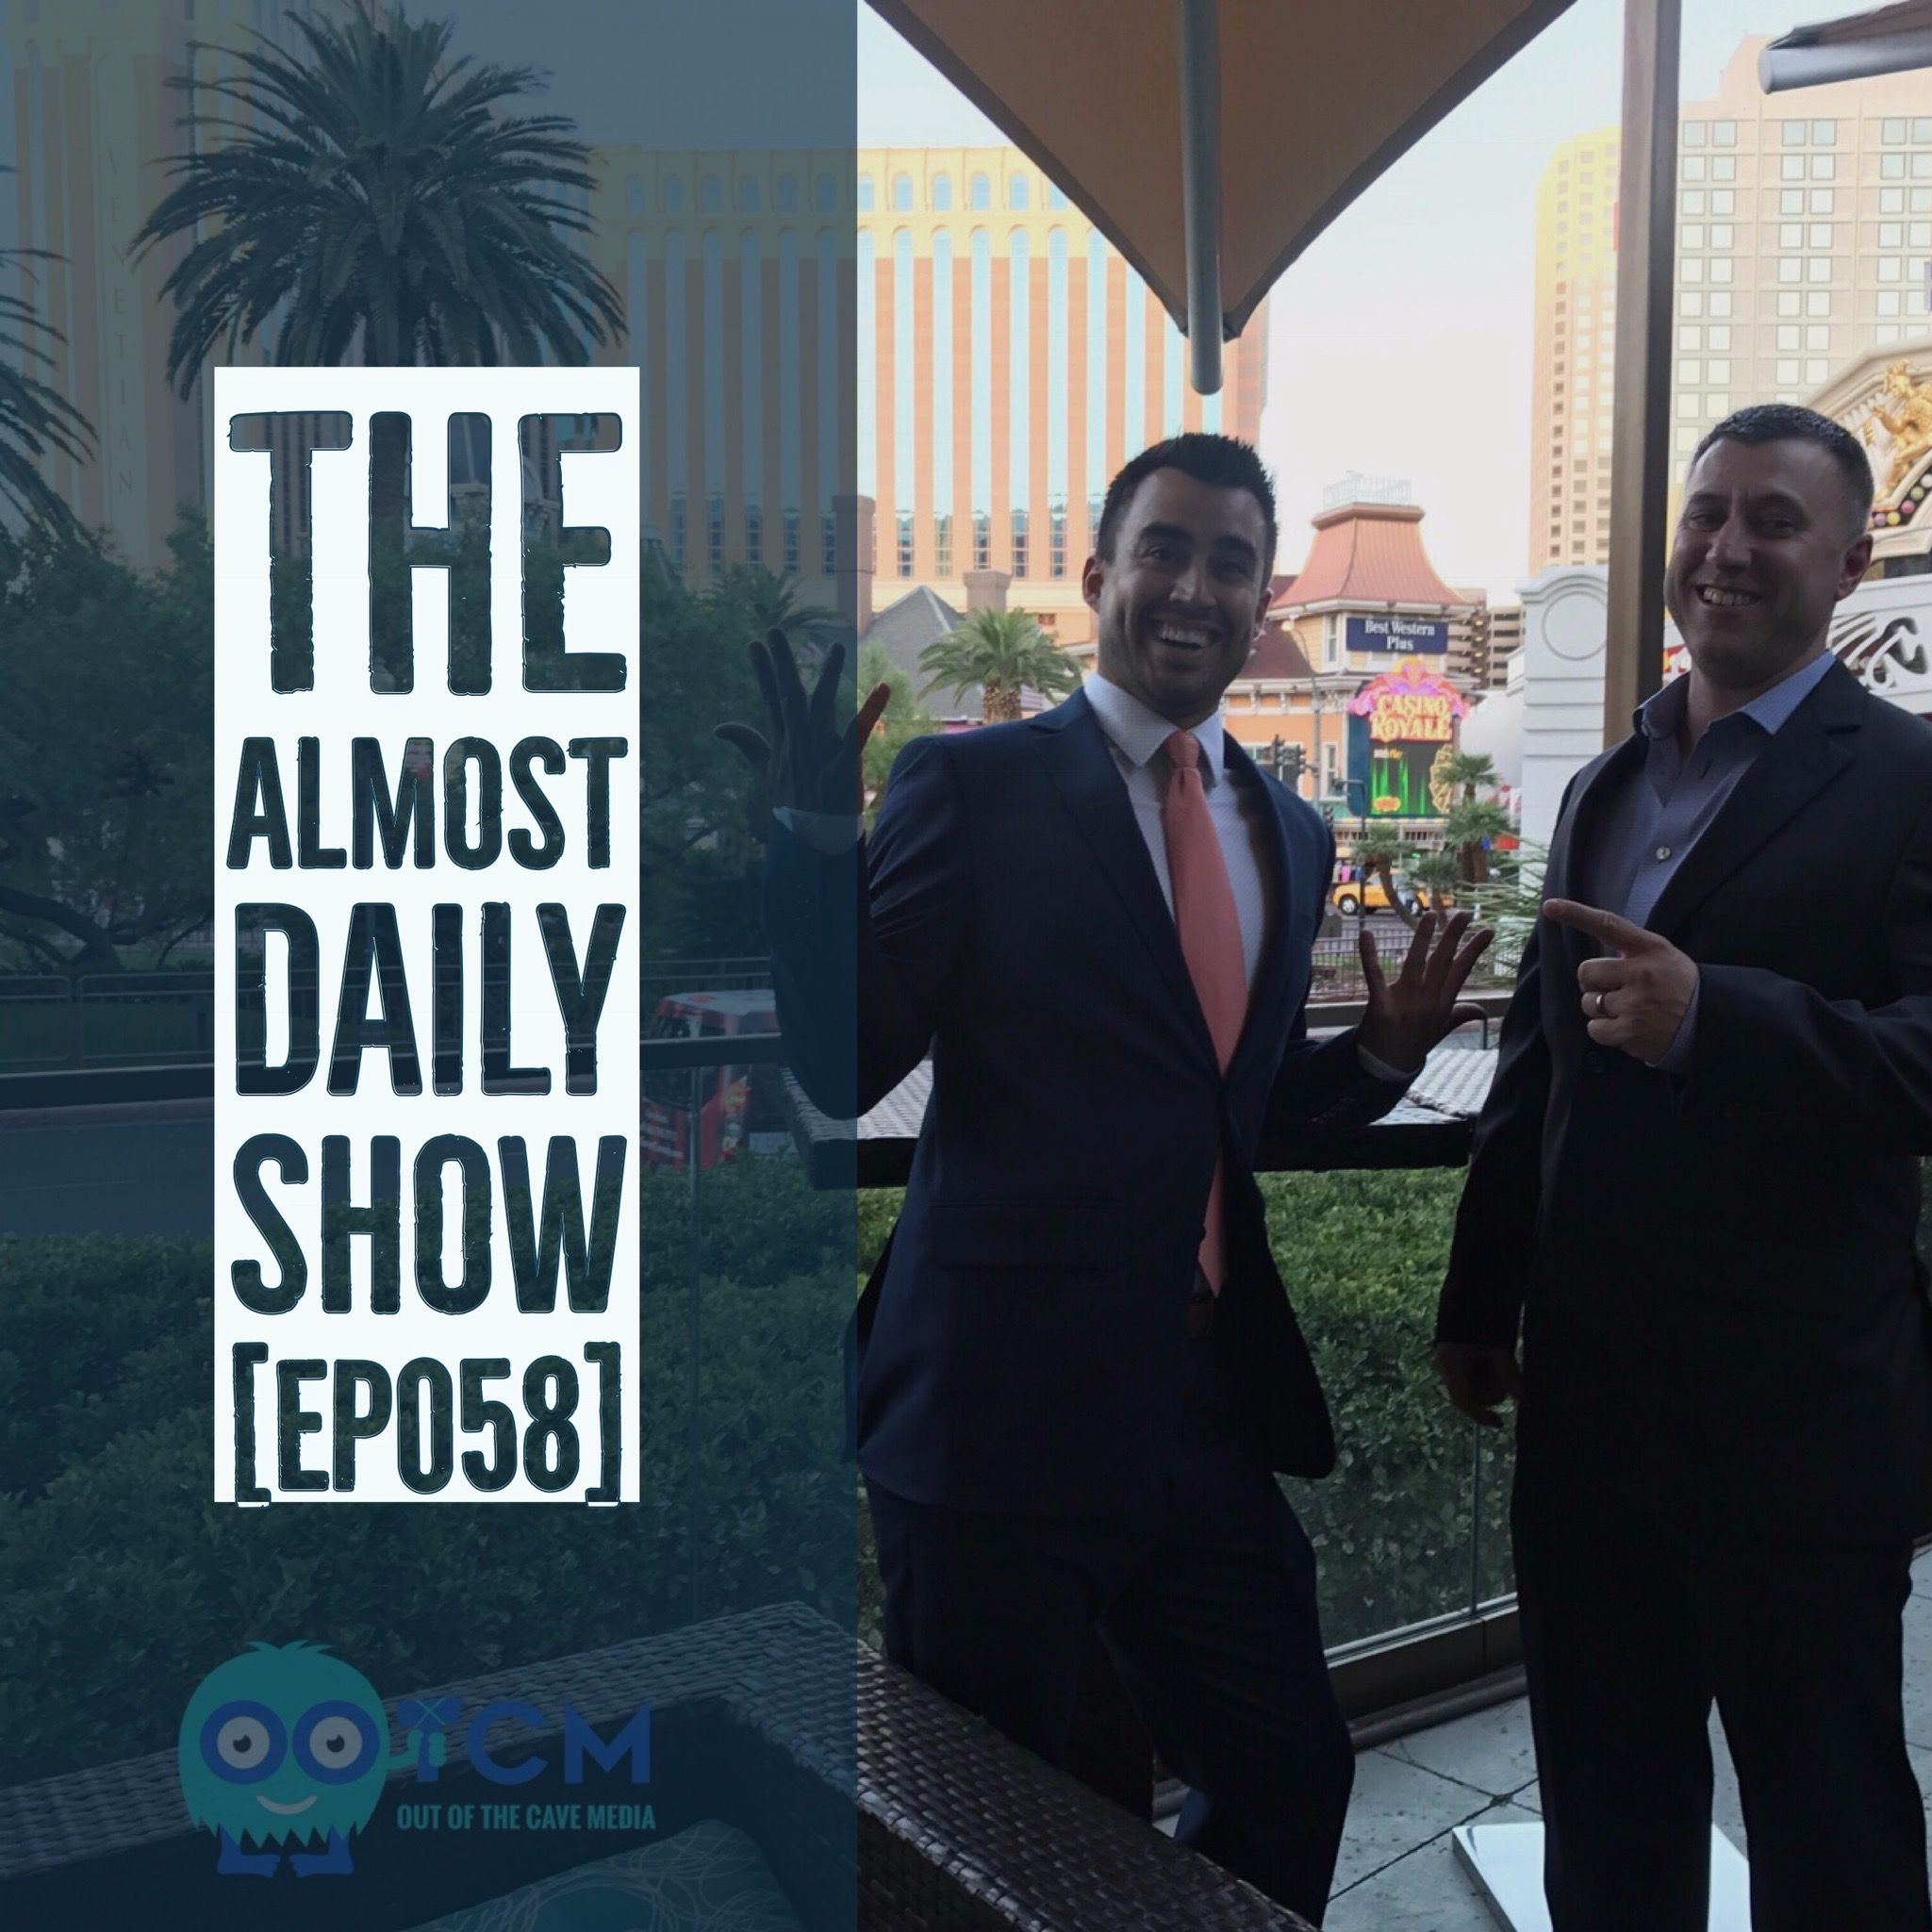 Displaying Your Why | The Almost Daily Show Ep 058